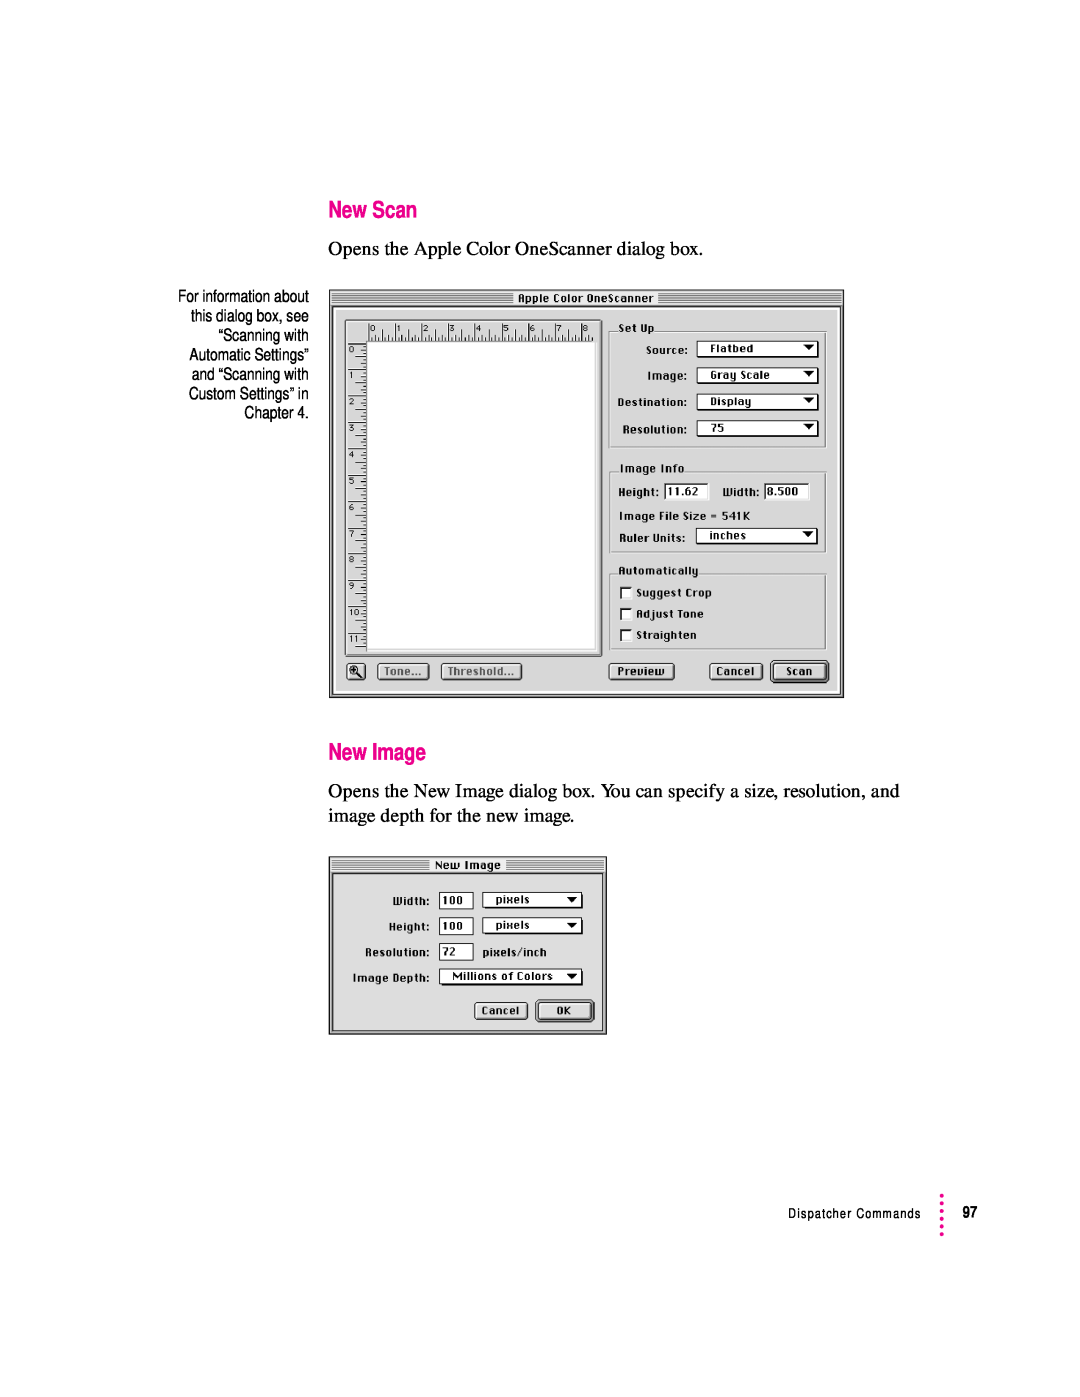 Apple 1230, 627 user manual New Scan, New Image, Opens the Apple Color OneScanner dialog box, Dispatcher Commands 